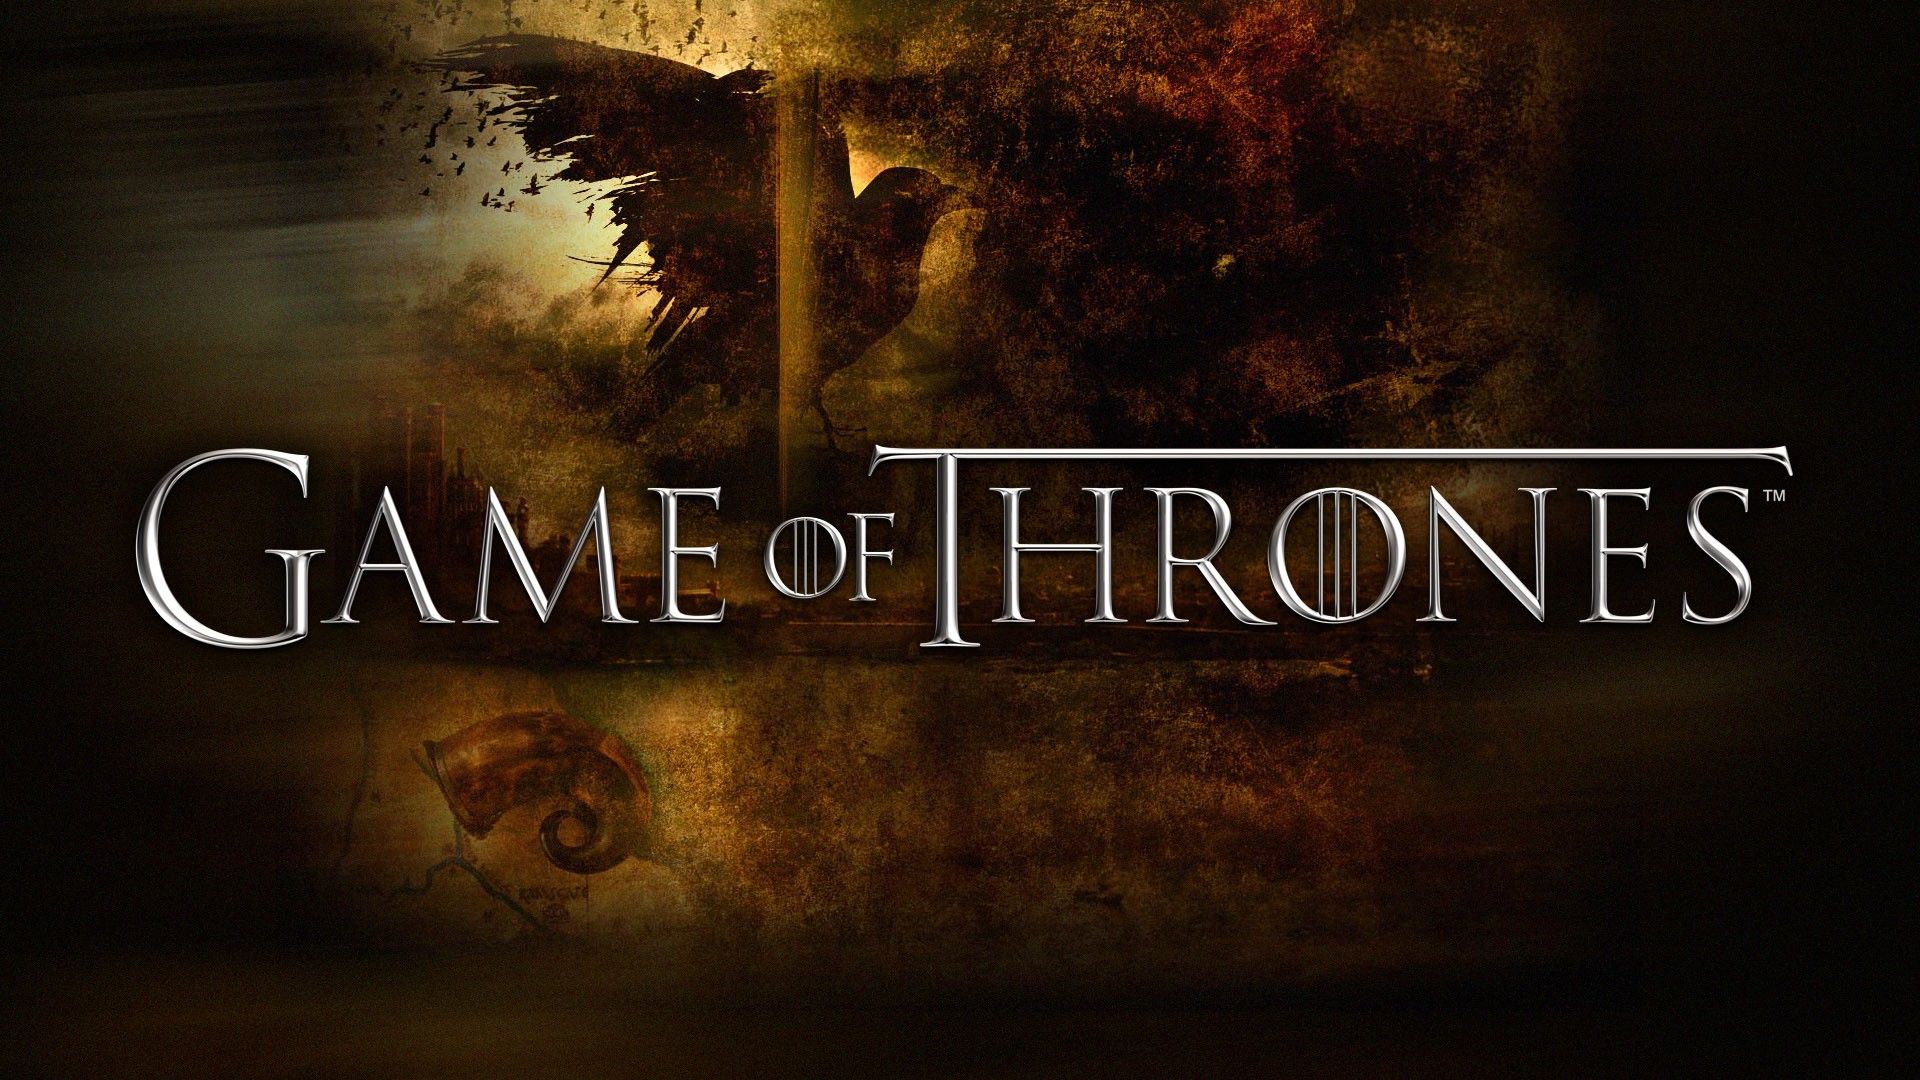 Game of Thrones HD Wallpaper New Tab Theme. Watch game of thrones, Game of thrones theme, Game of thrones episodes